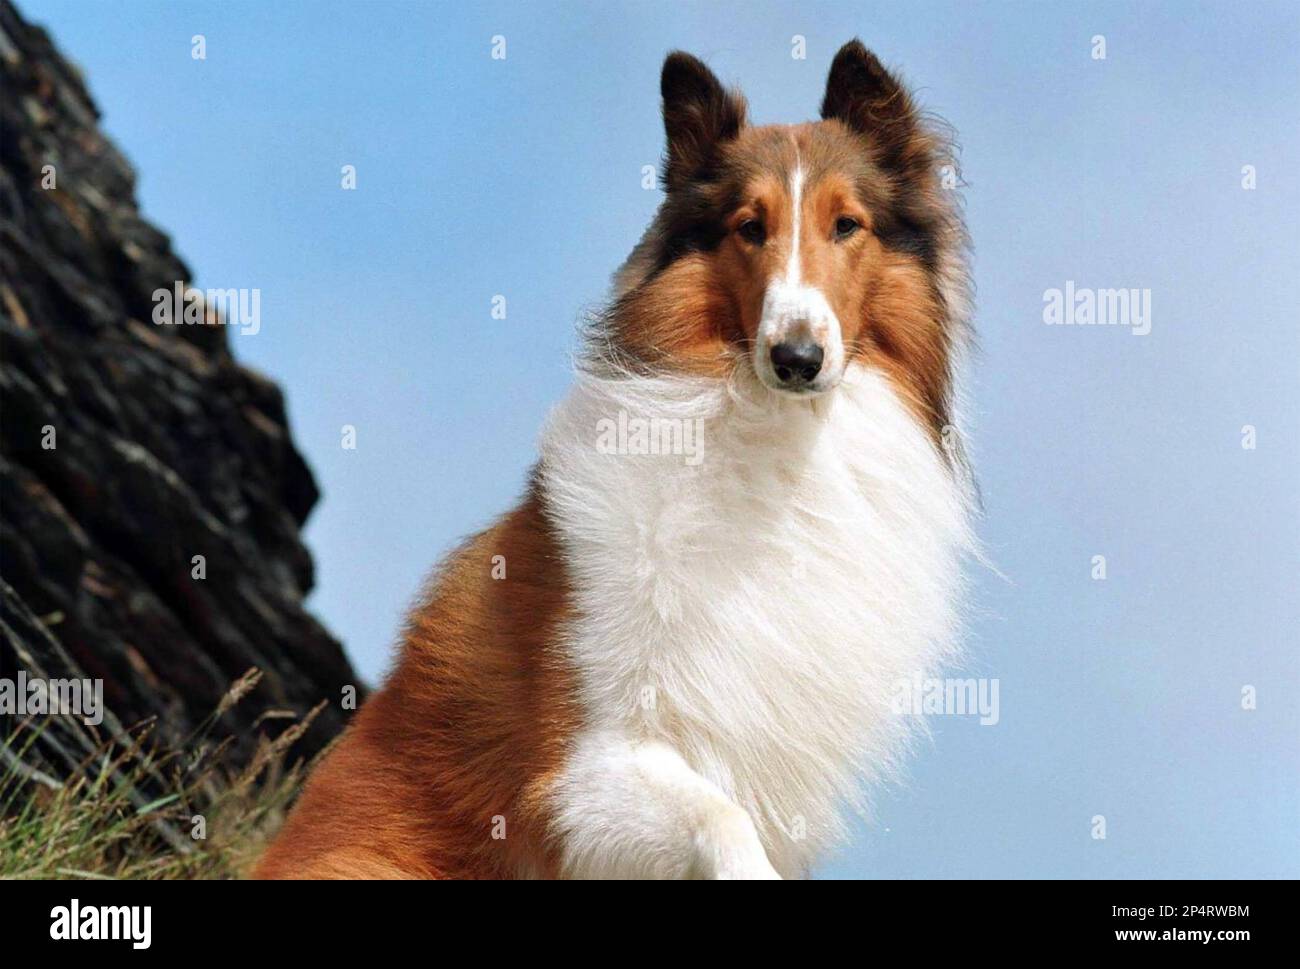 A little Lassie in every collie